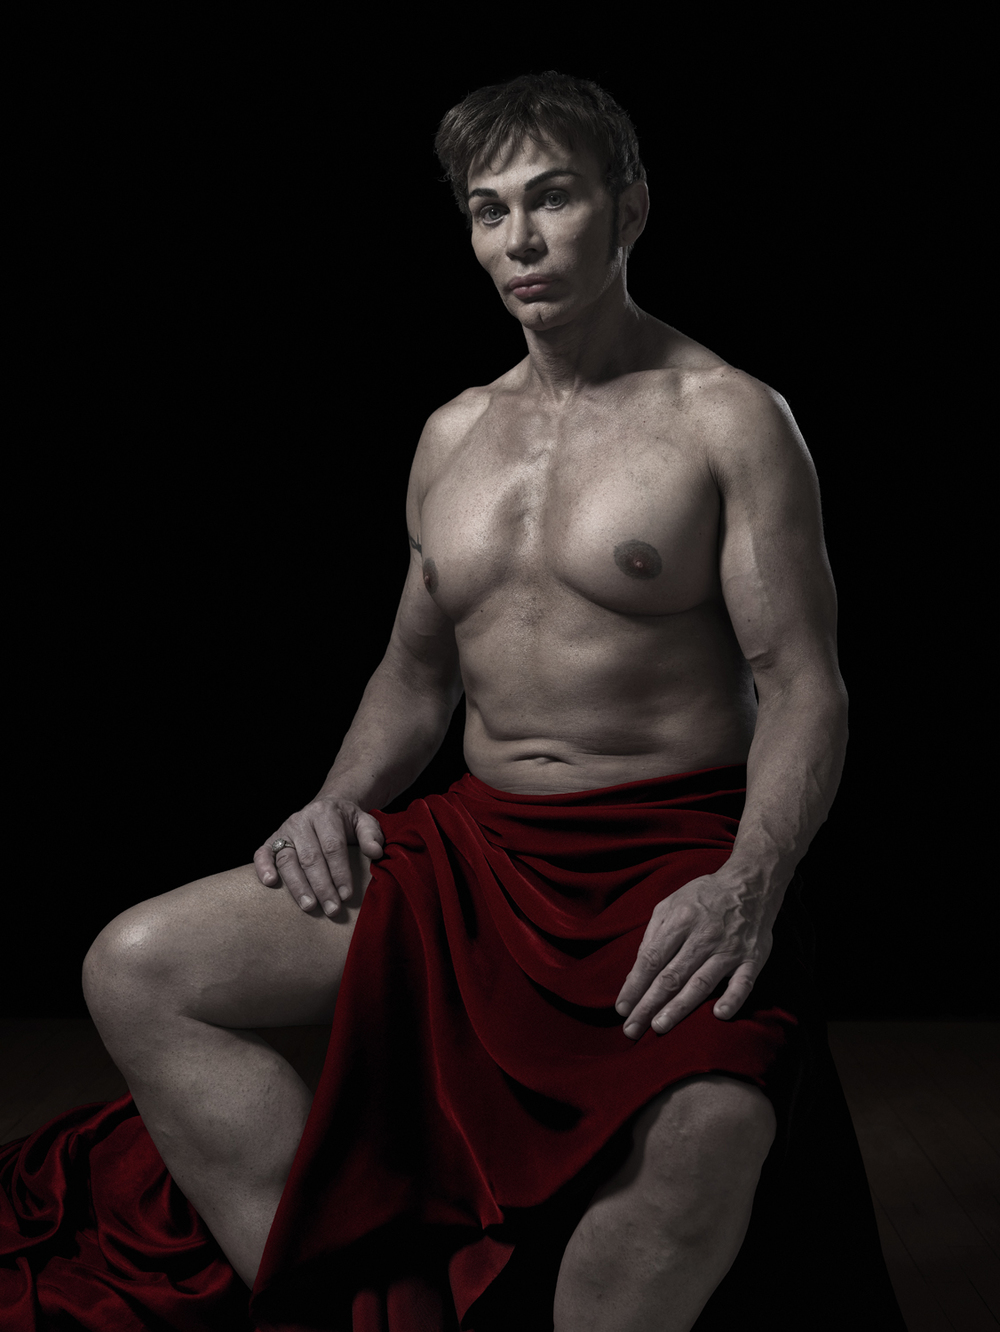   From A New Kind of Beauty: Steve © Phillip Toledano  